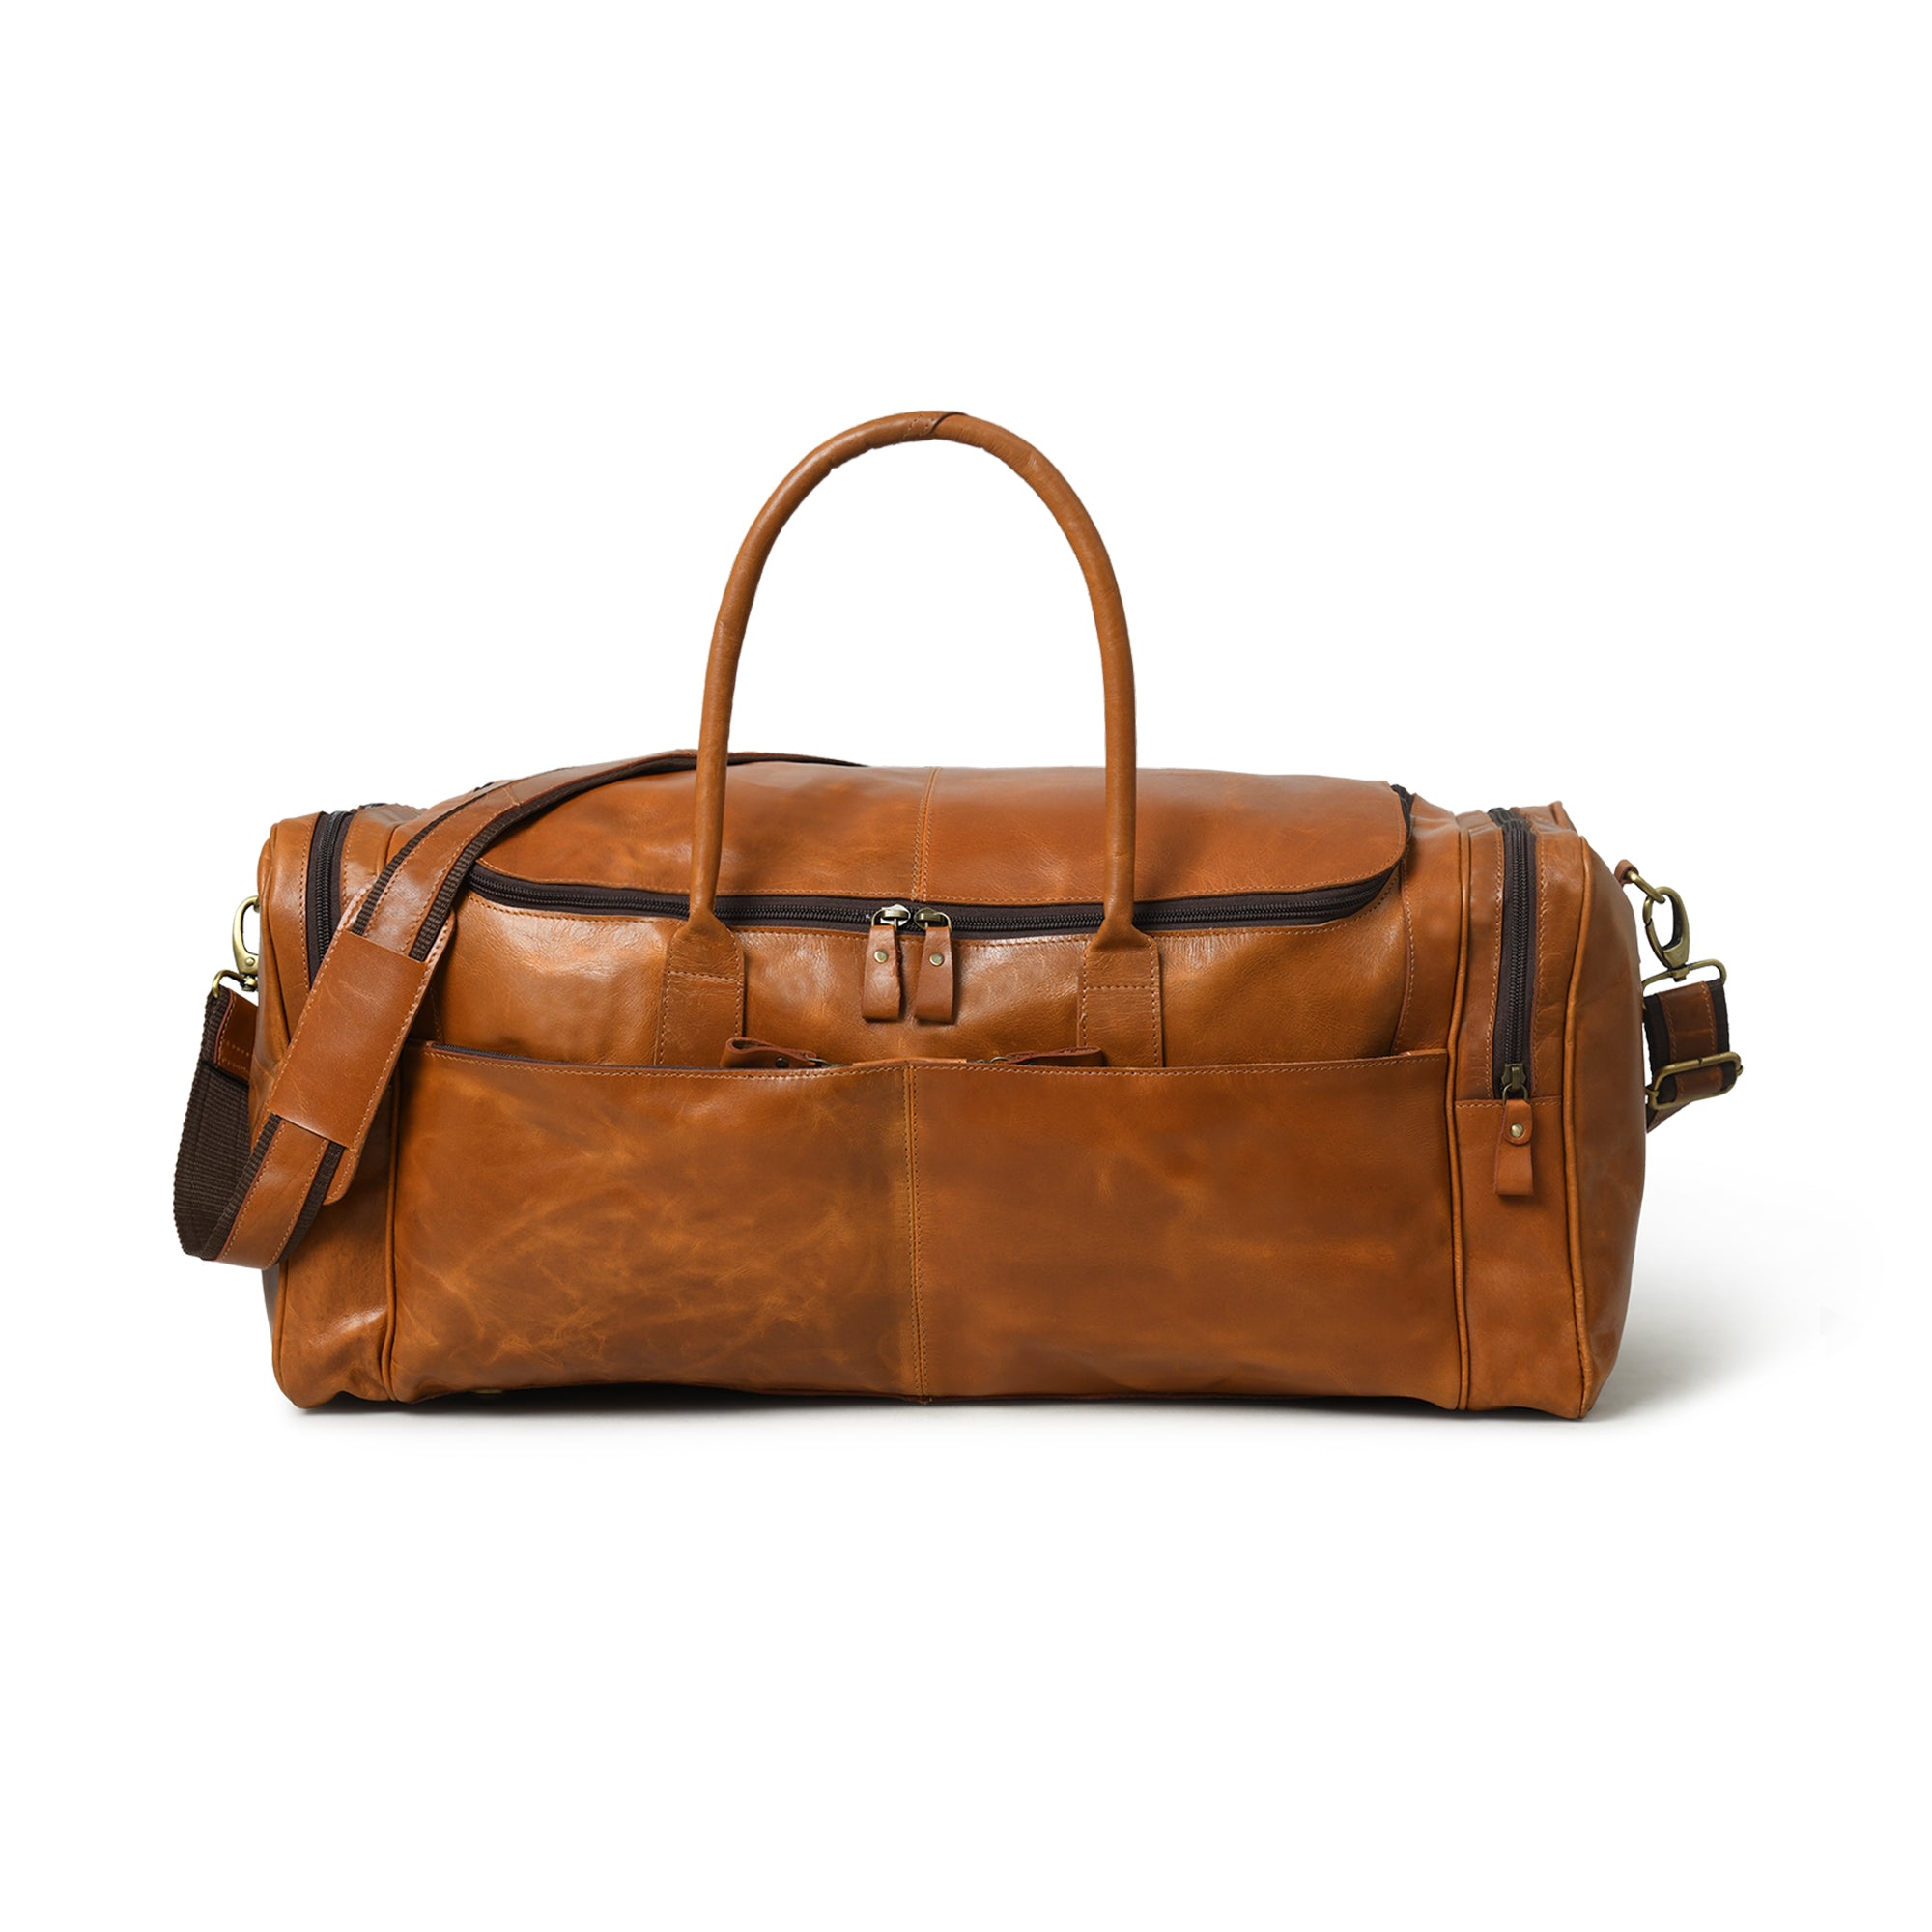 The Epitome of Sophisticated Travel: Klasse Leer's Leather Duffle Bags